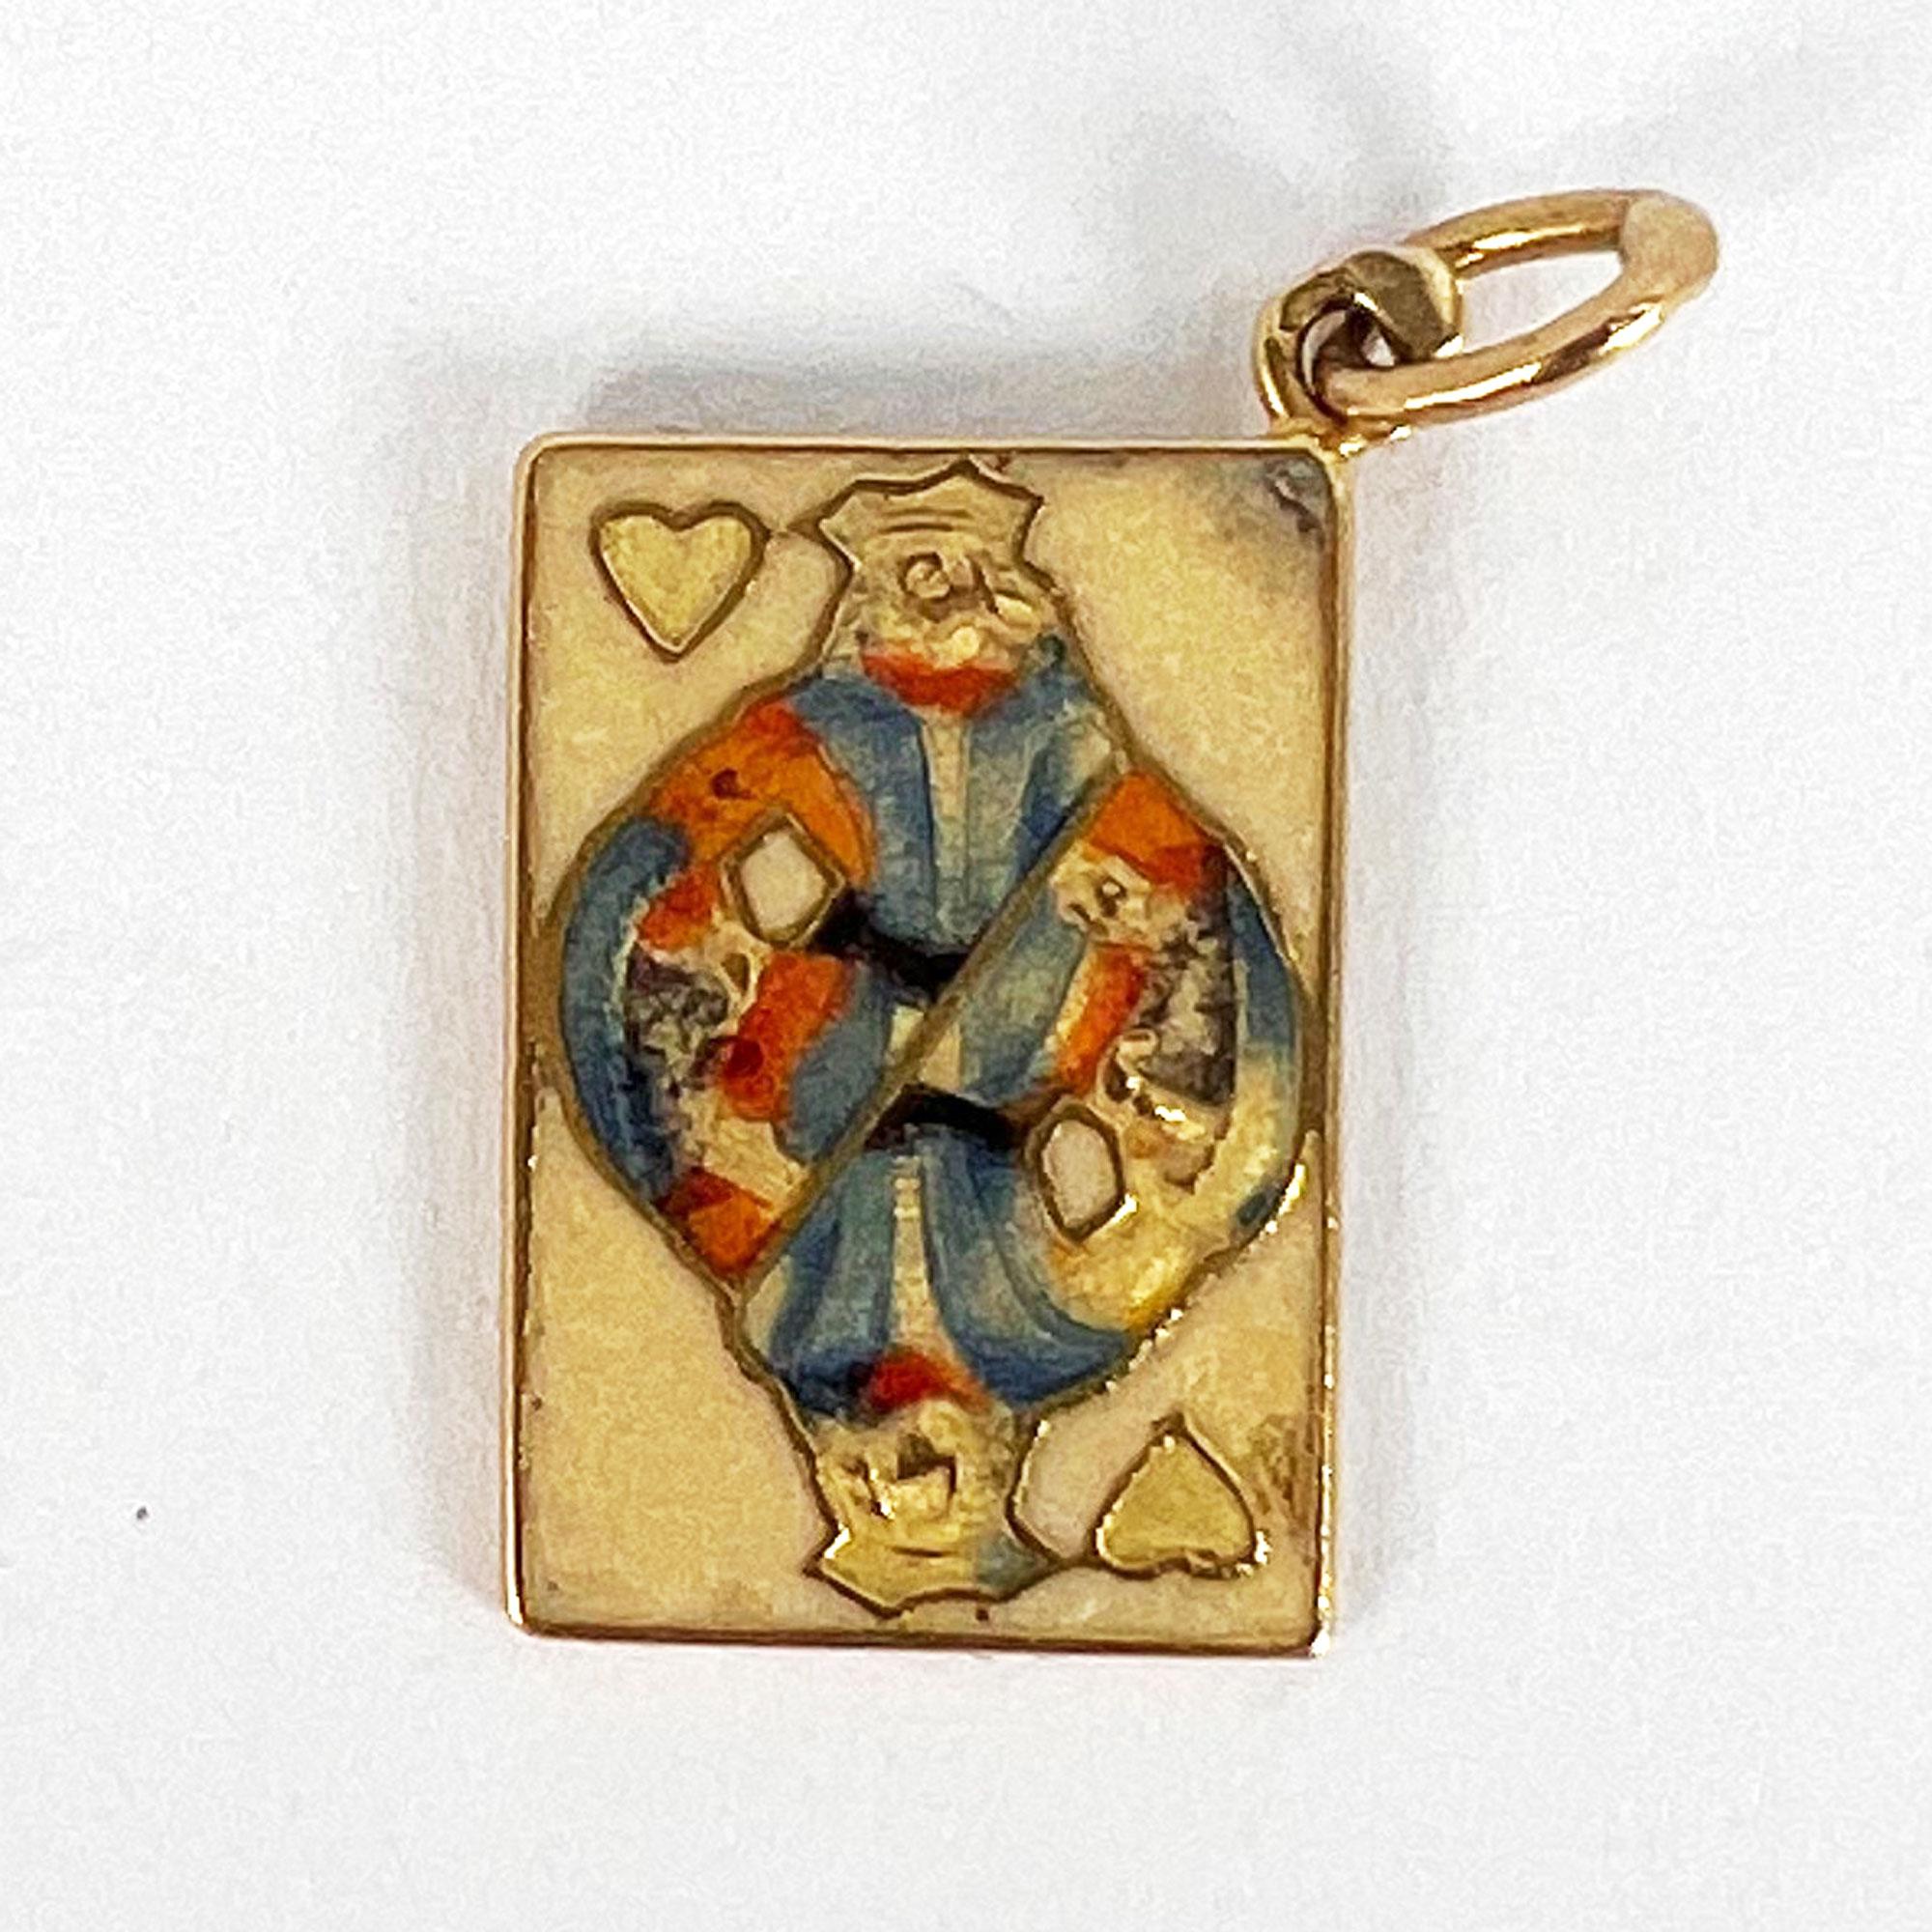 French King of Hearts Playing Card 18K Yellow Gold Enamel Charm Pendant 1